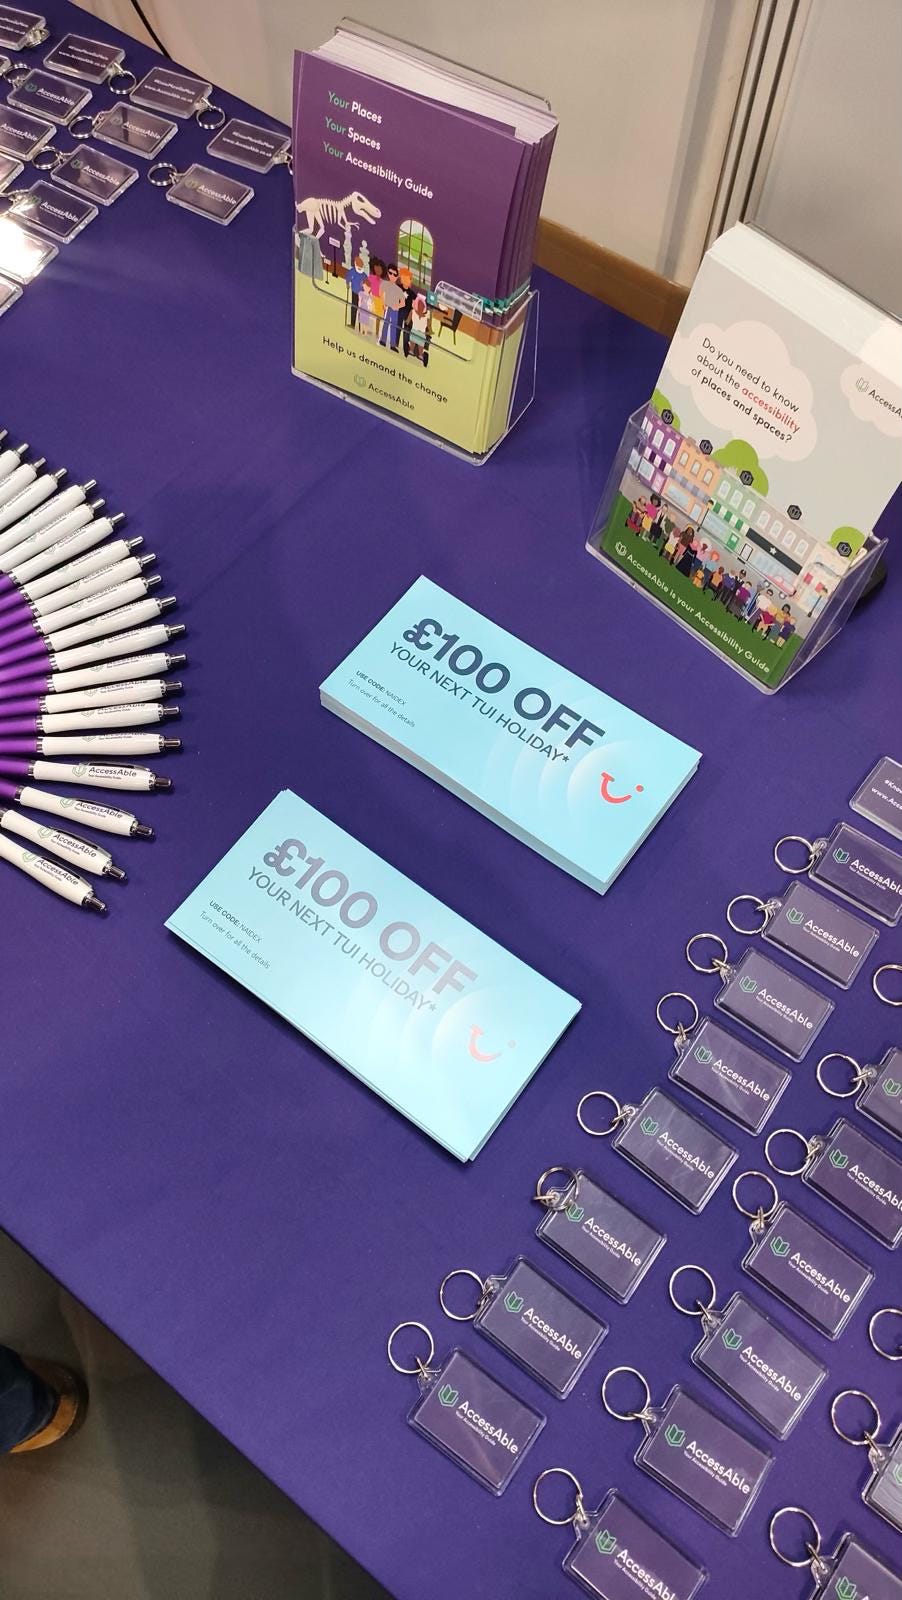 A Birds Eye view of the AccessAble stand table, including £100 vouchers off Tui holidays 